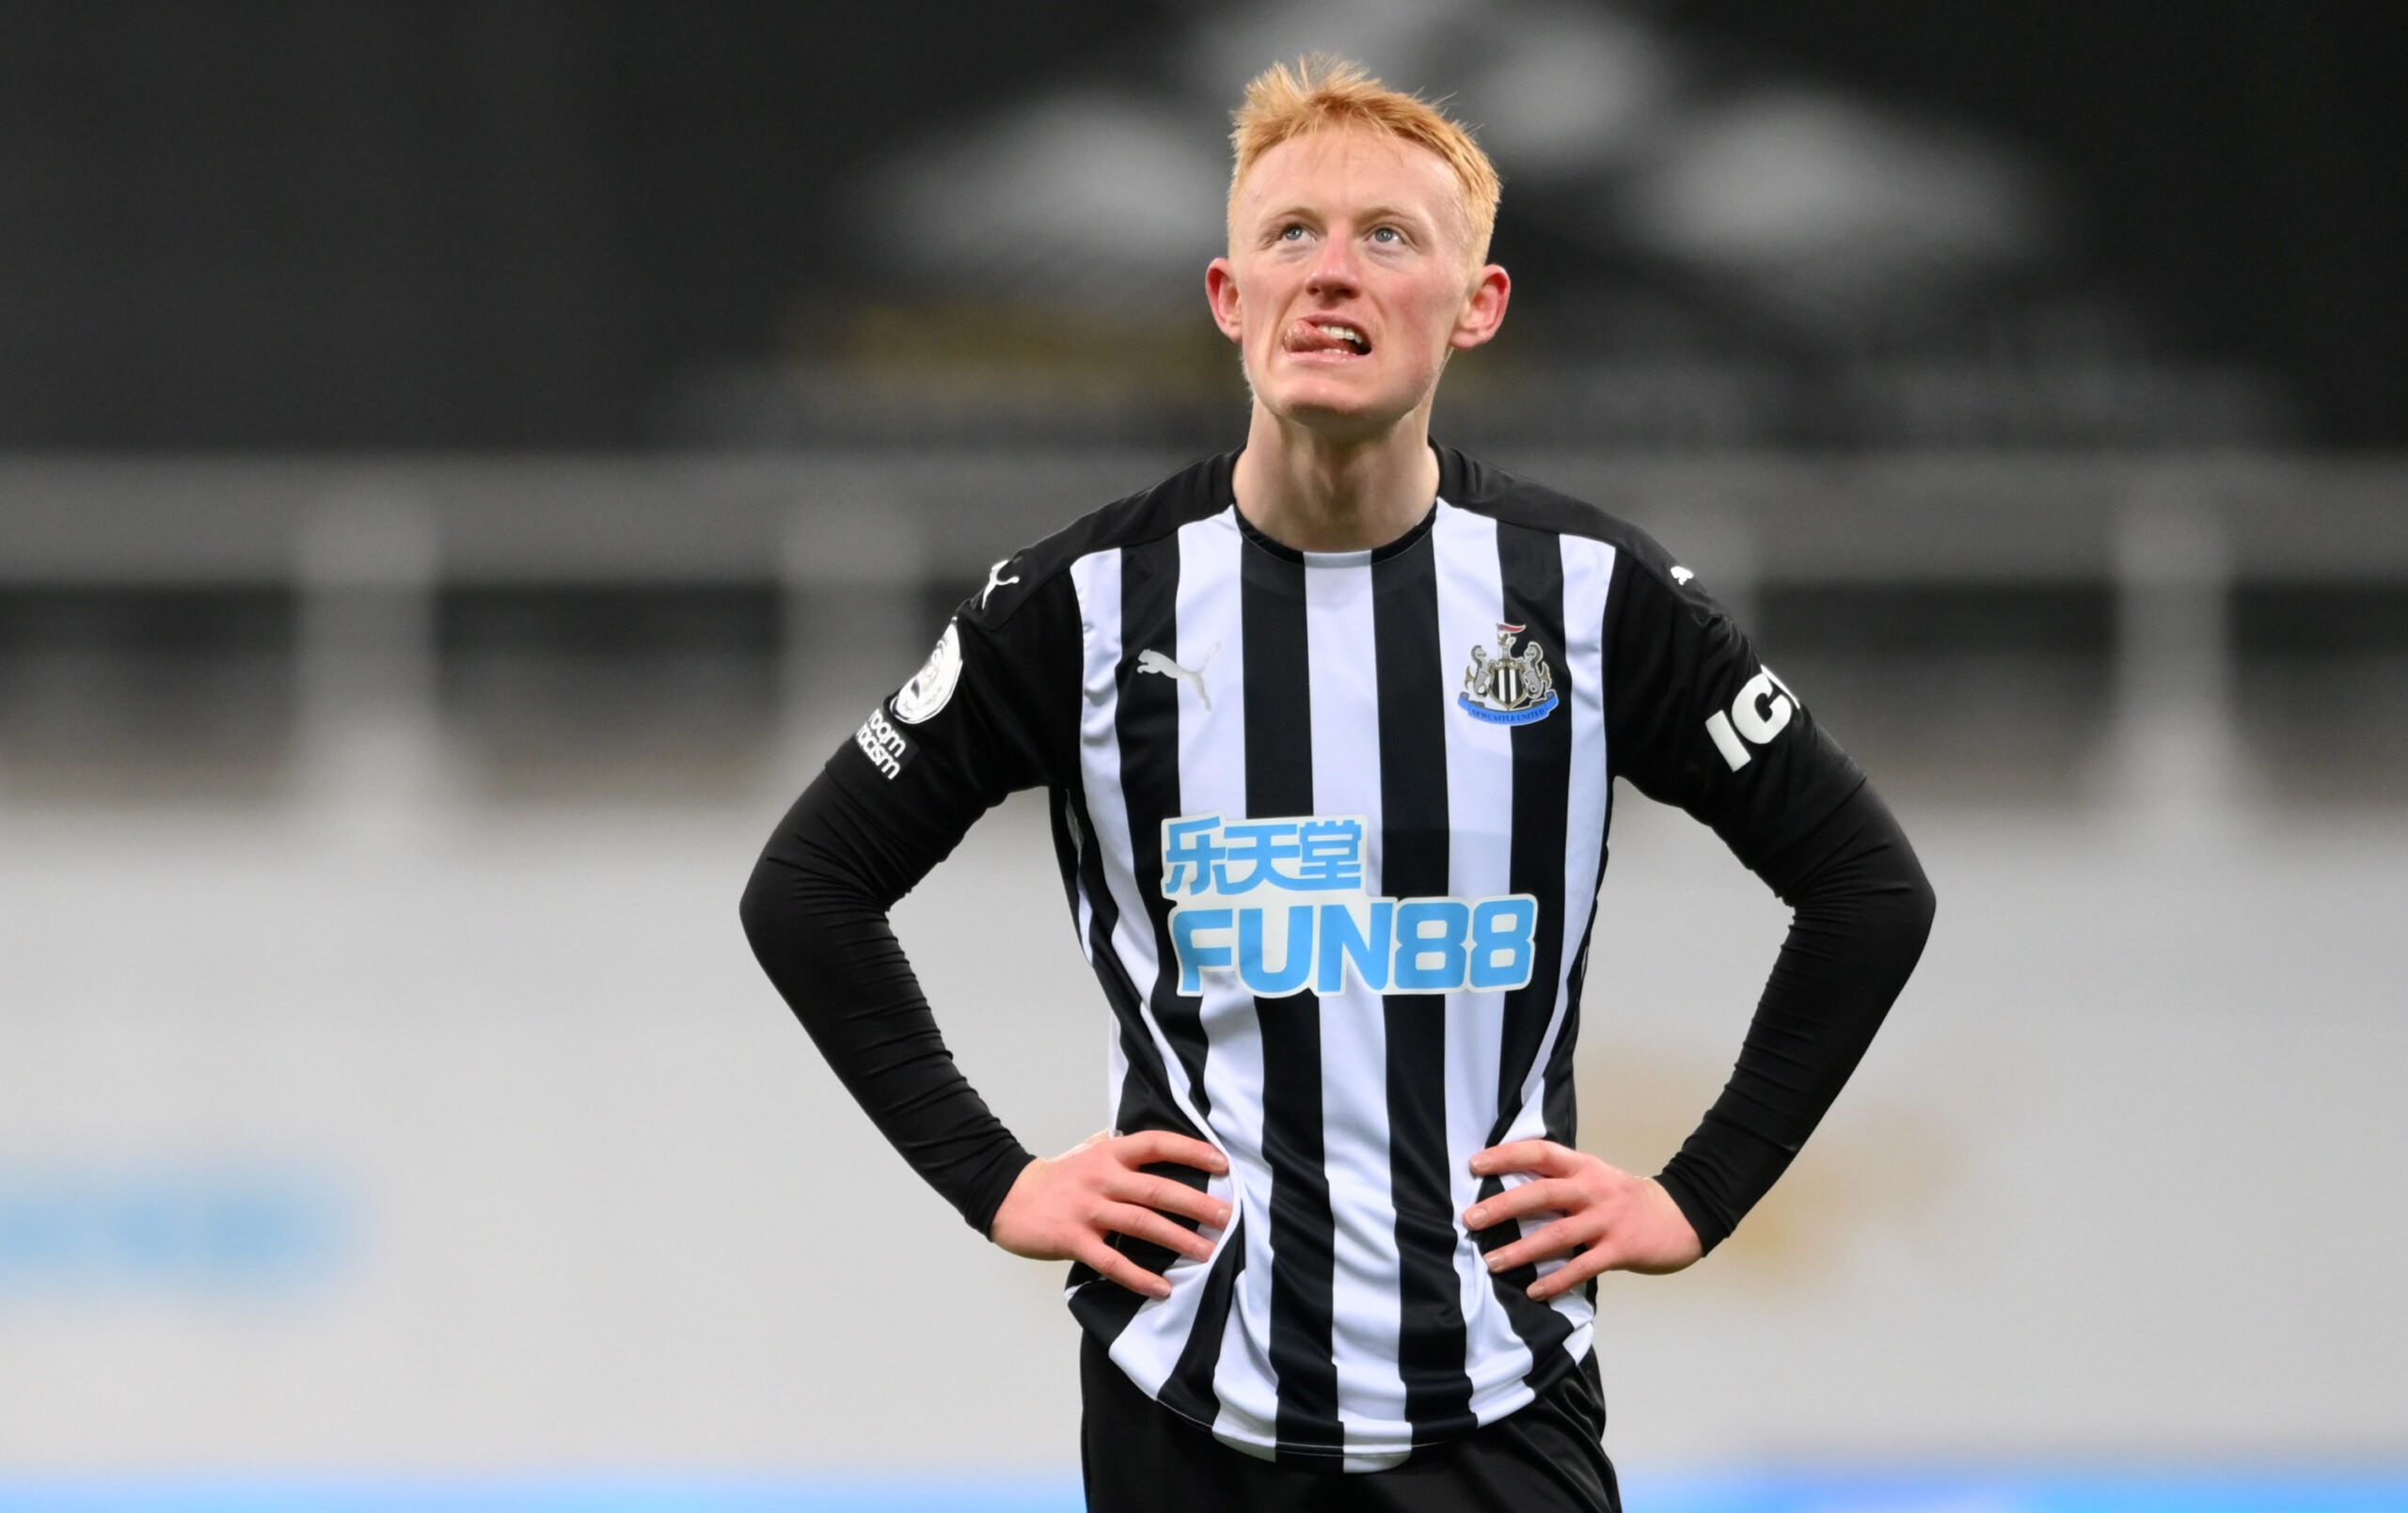 Soccer Football - Premier League - Newcastle United v Leicester City - St James' Park, Newcastle, Britain - January 3, 2021 Newcastle United's Matty Longstaff looks dejected after the match Pool via REUTERS/Stu Forster EDITORIAL USE ONLY. No use with unauthorized audio, video, data, fixture lists, club/league logos or 'live' services. Online in-match use limited to 75 images, no video emulation. No use in betting, games or single club /league/player publications.  Please contact your account rep